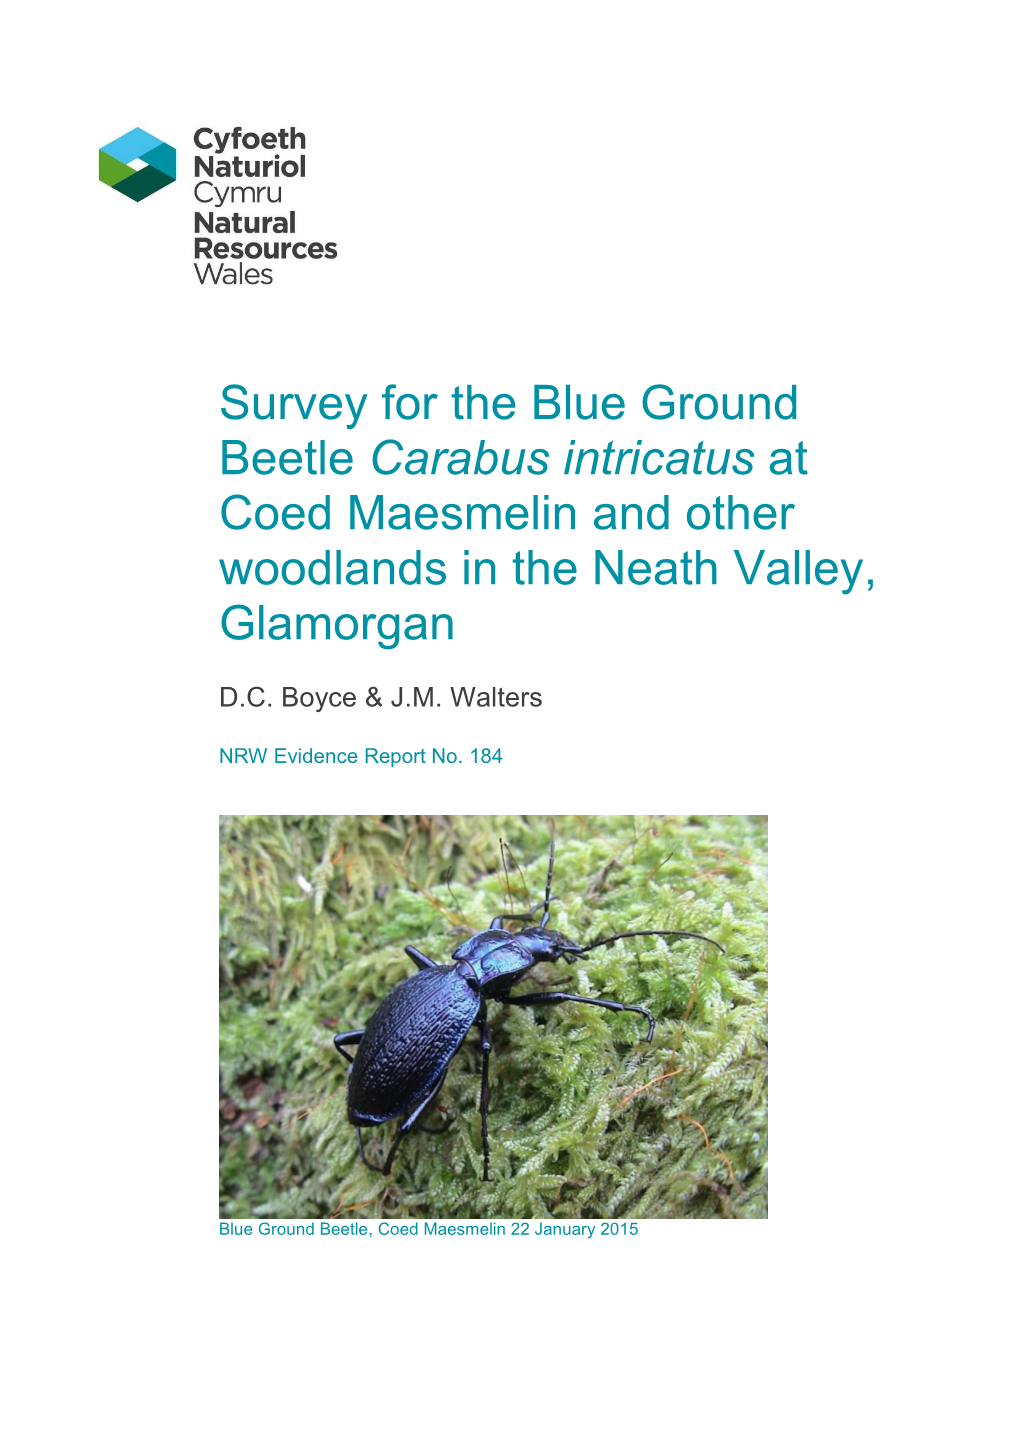 Survey for the Blue Ground Beetle Carabus Intricatus at Coed Maesmelin and Other Woodlands in the Neath Valley, Glamorgan